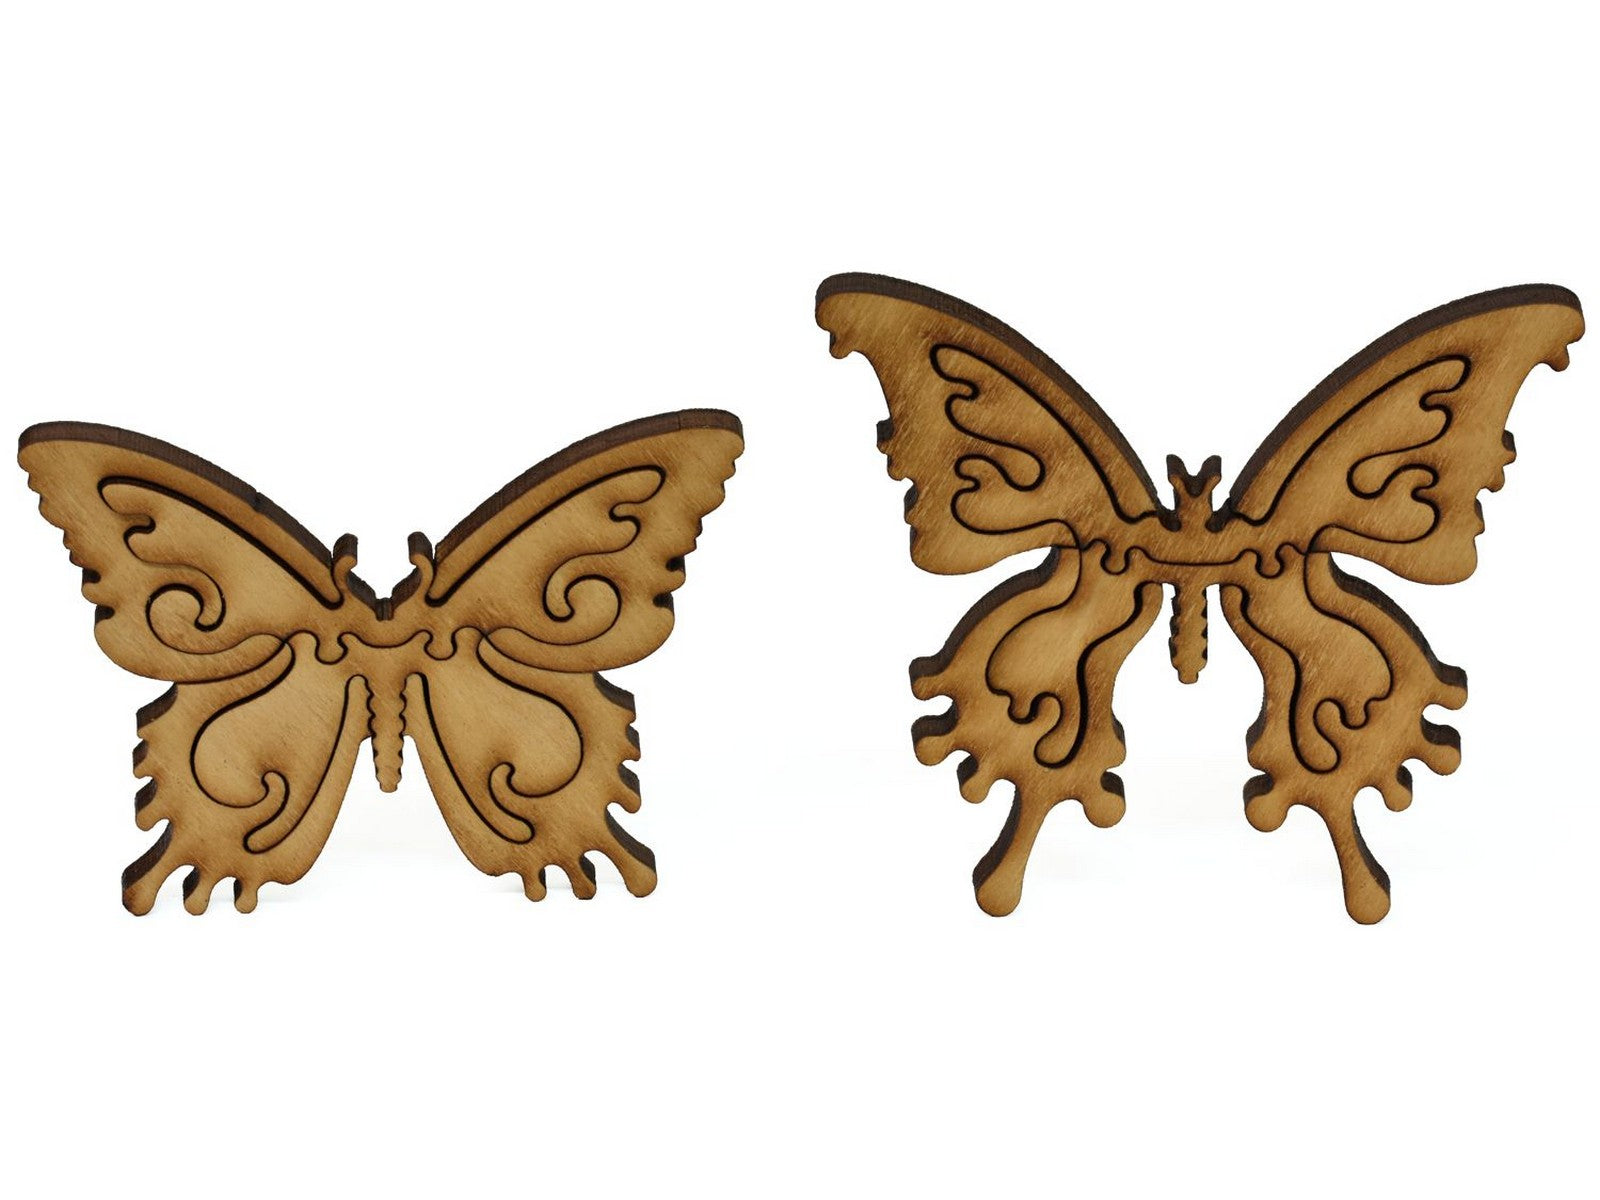 A closeup of pieces showing two large multi-piece butterflies.